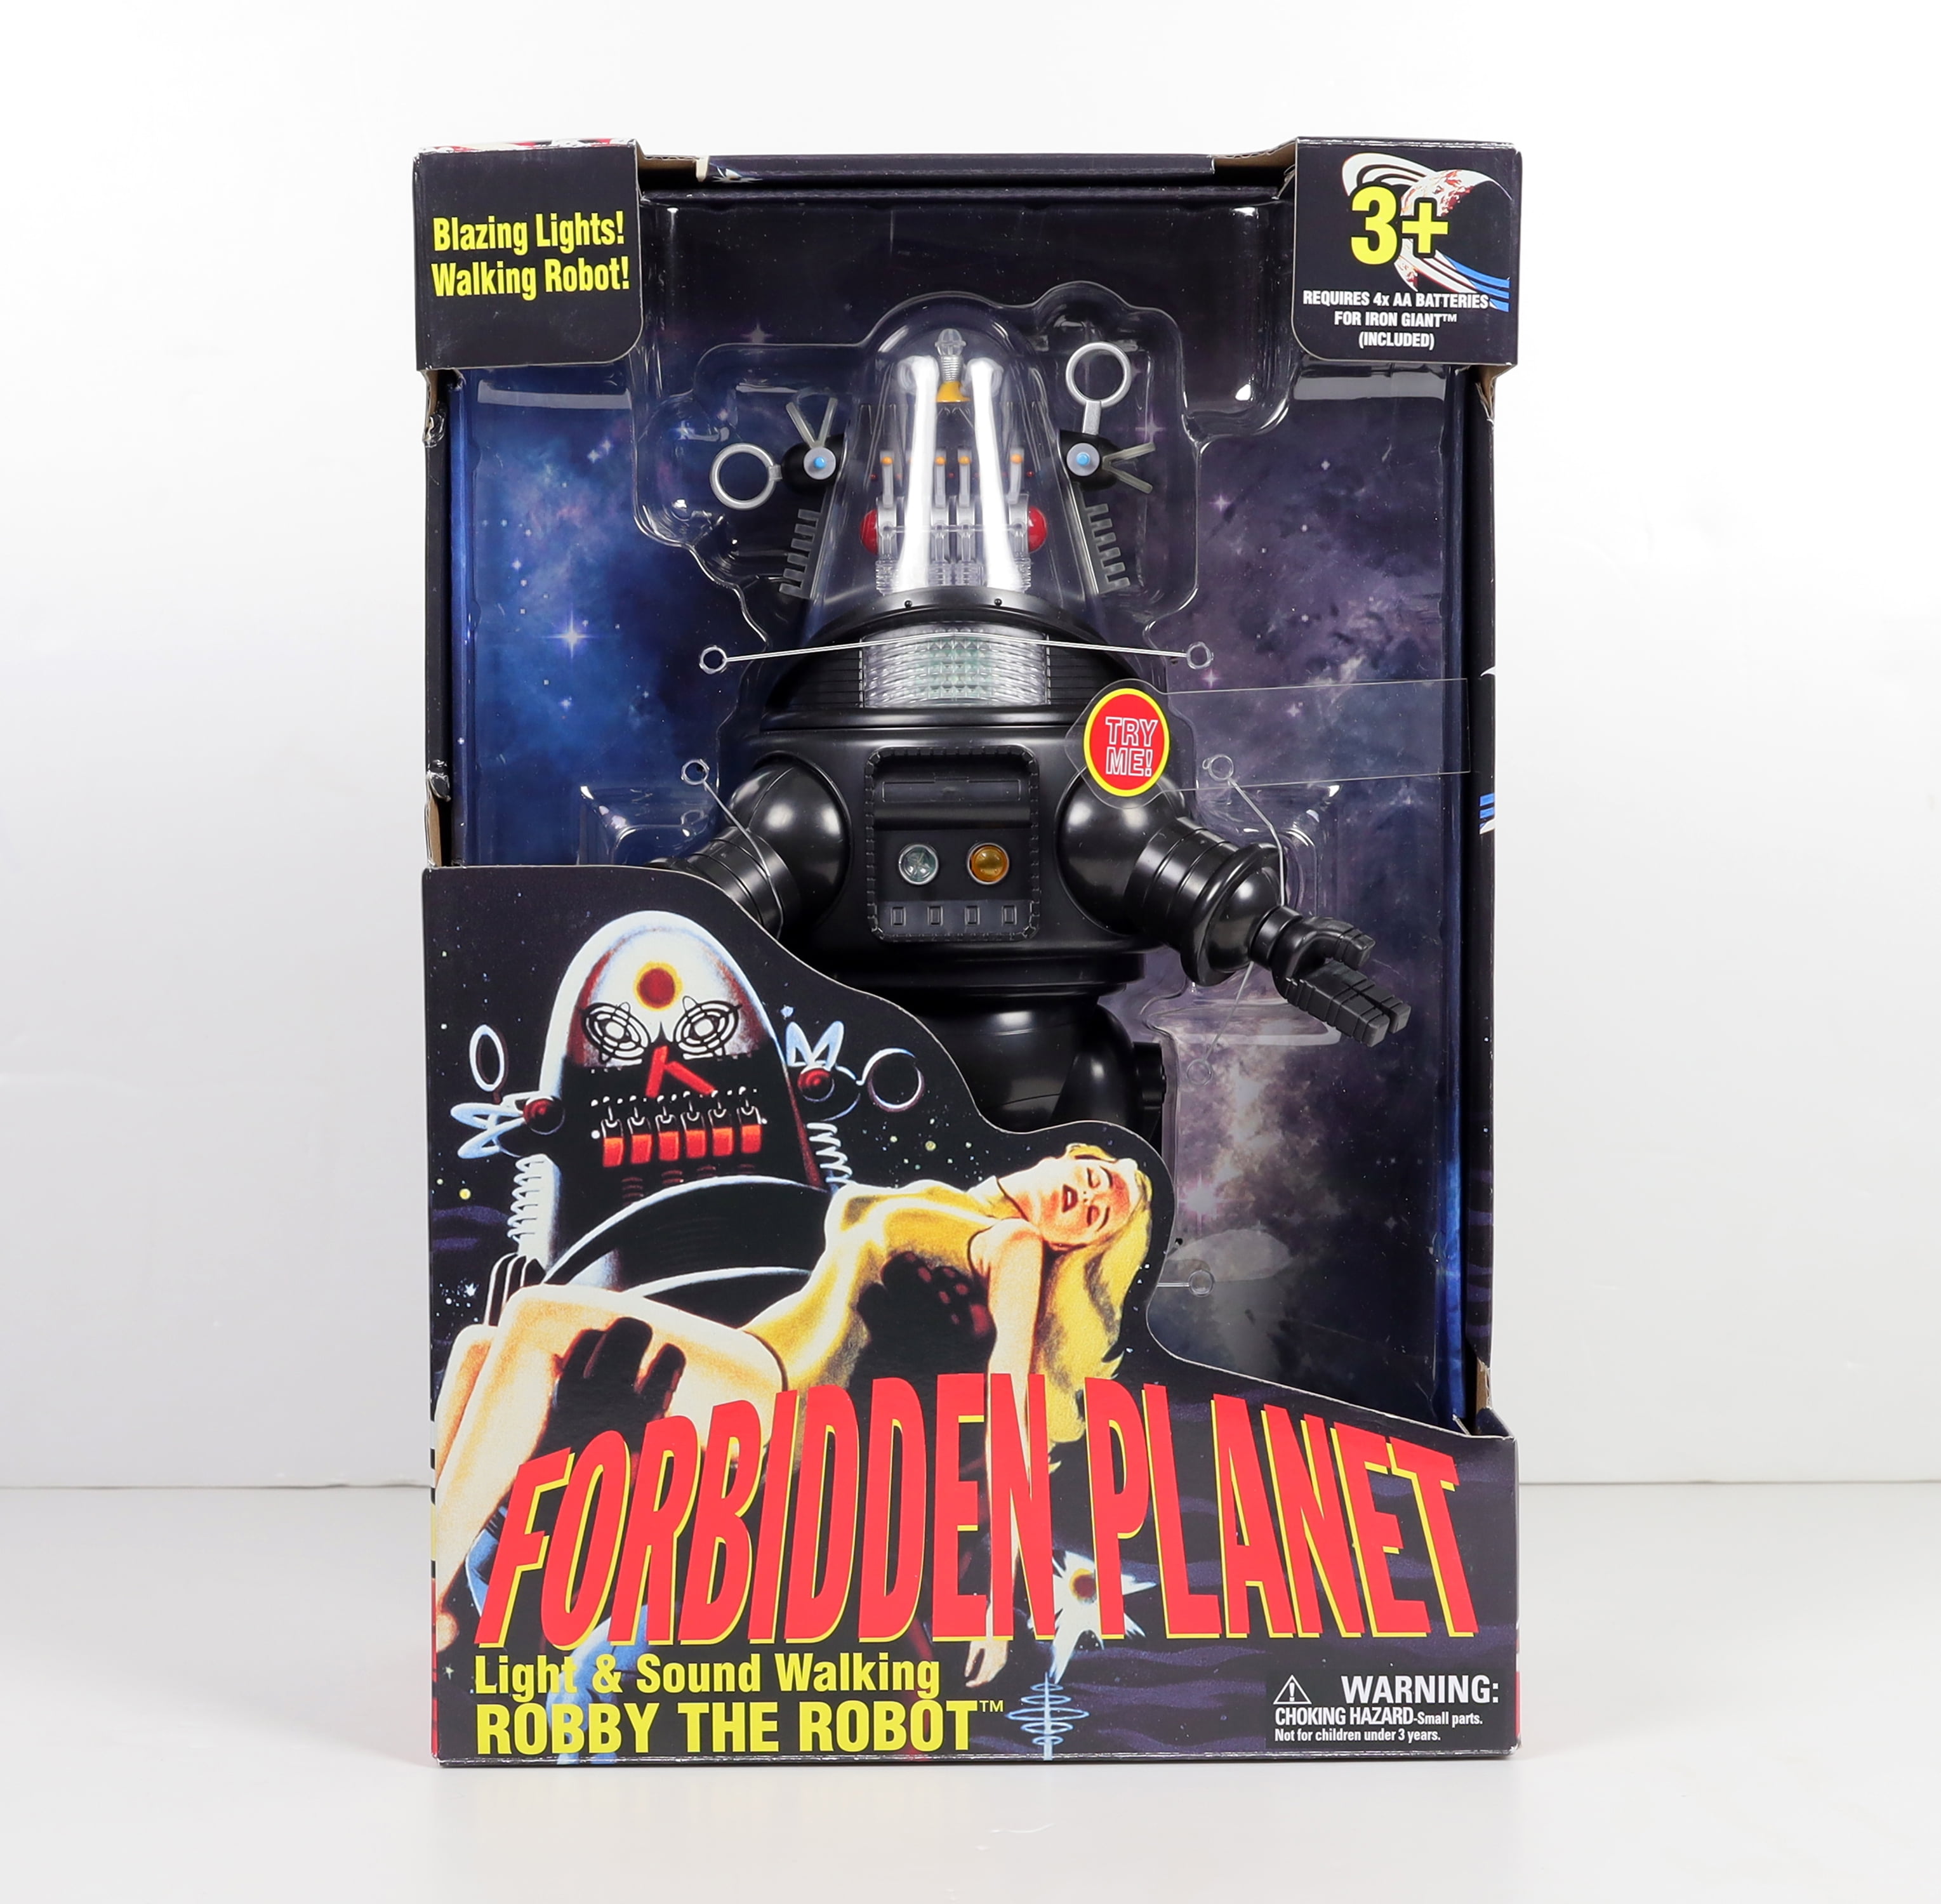 15" Action Figure Details about   Forbidden Planet Robby The Robot Light & Sound Walking Toy 